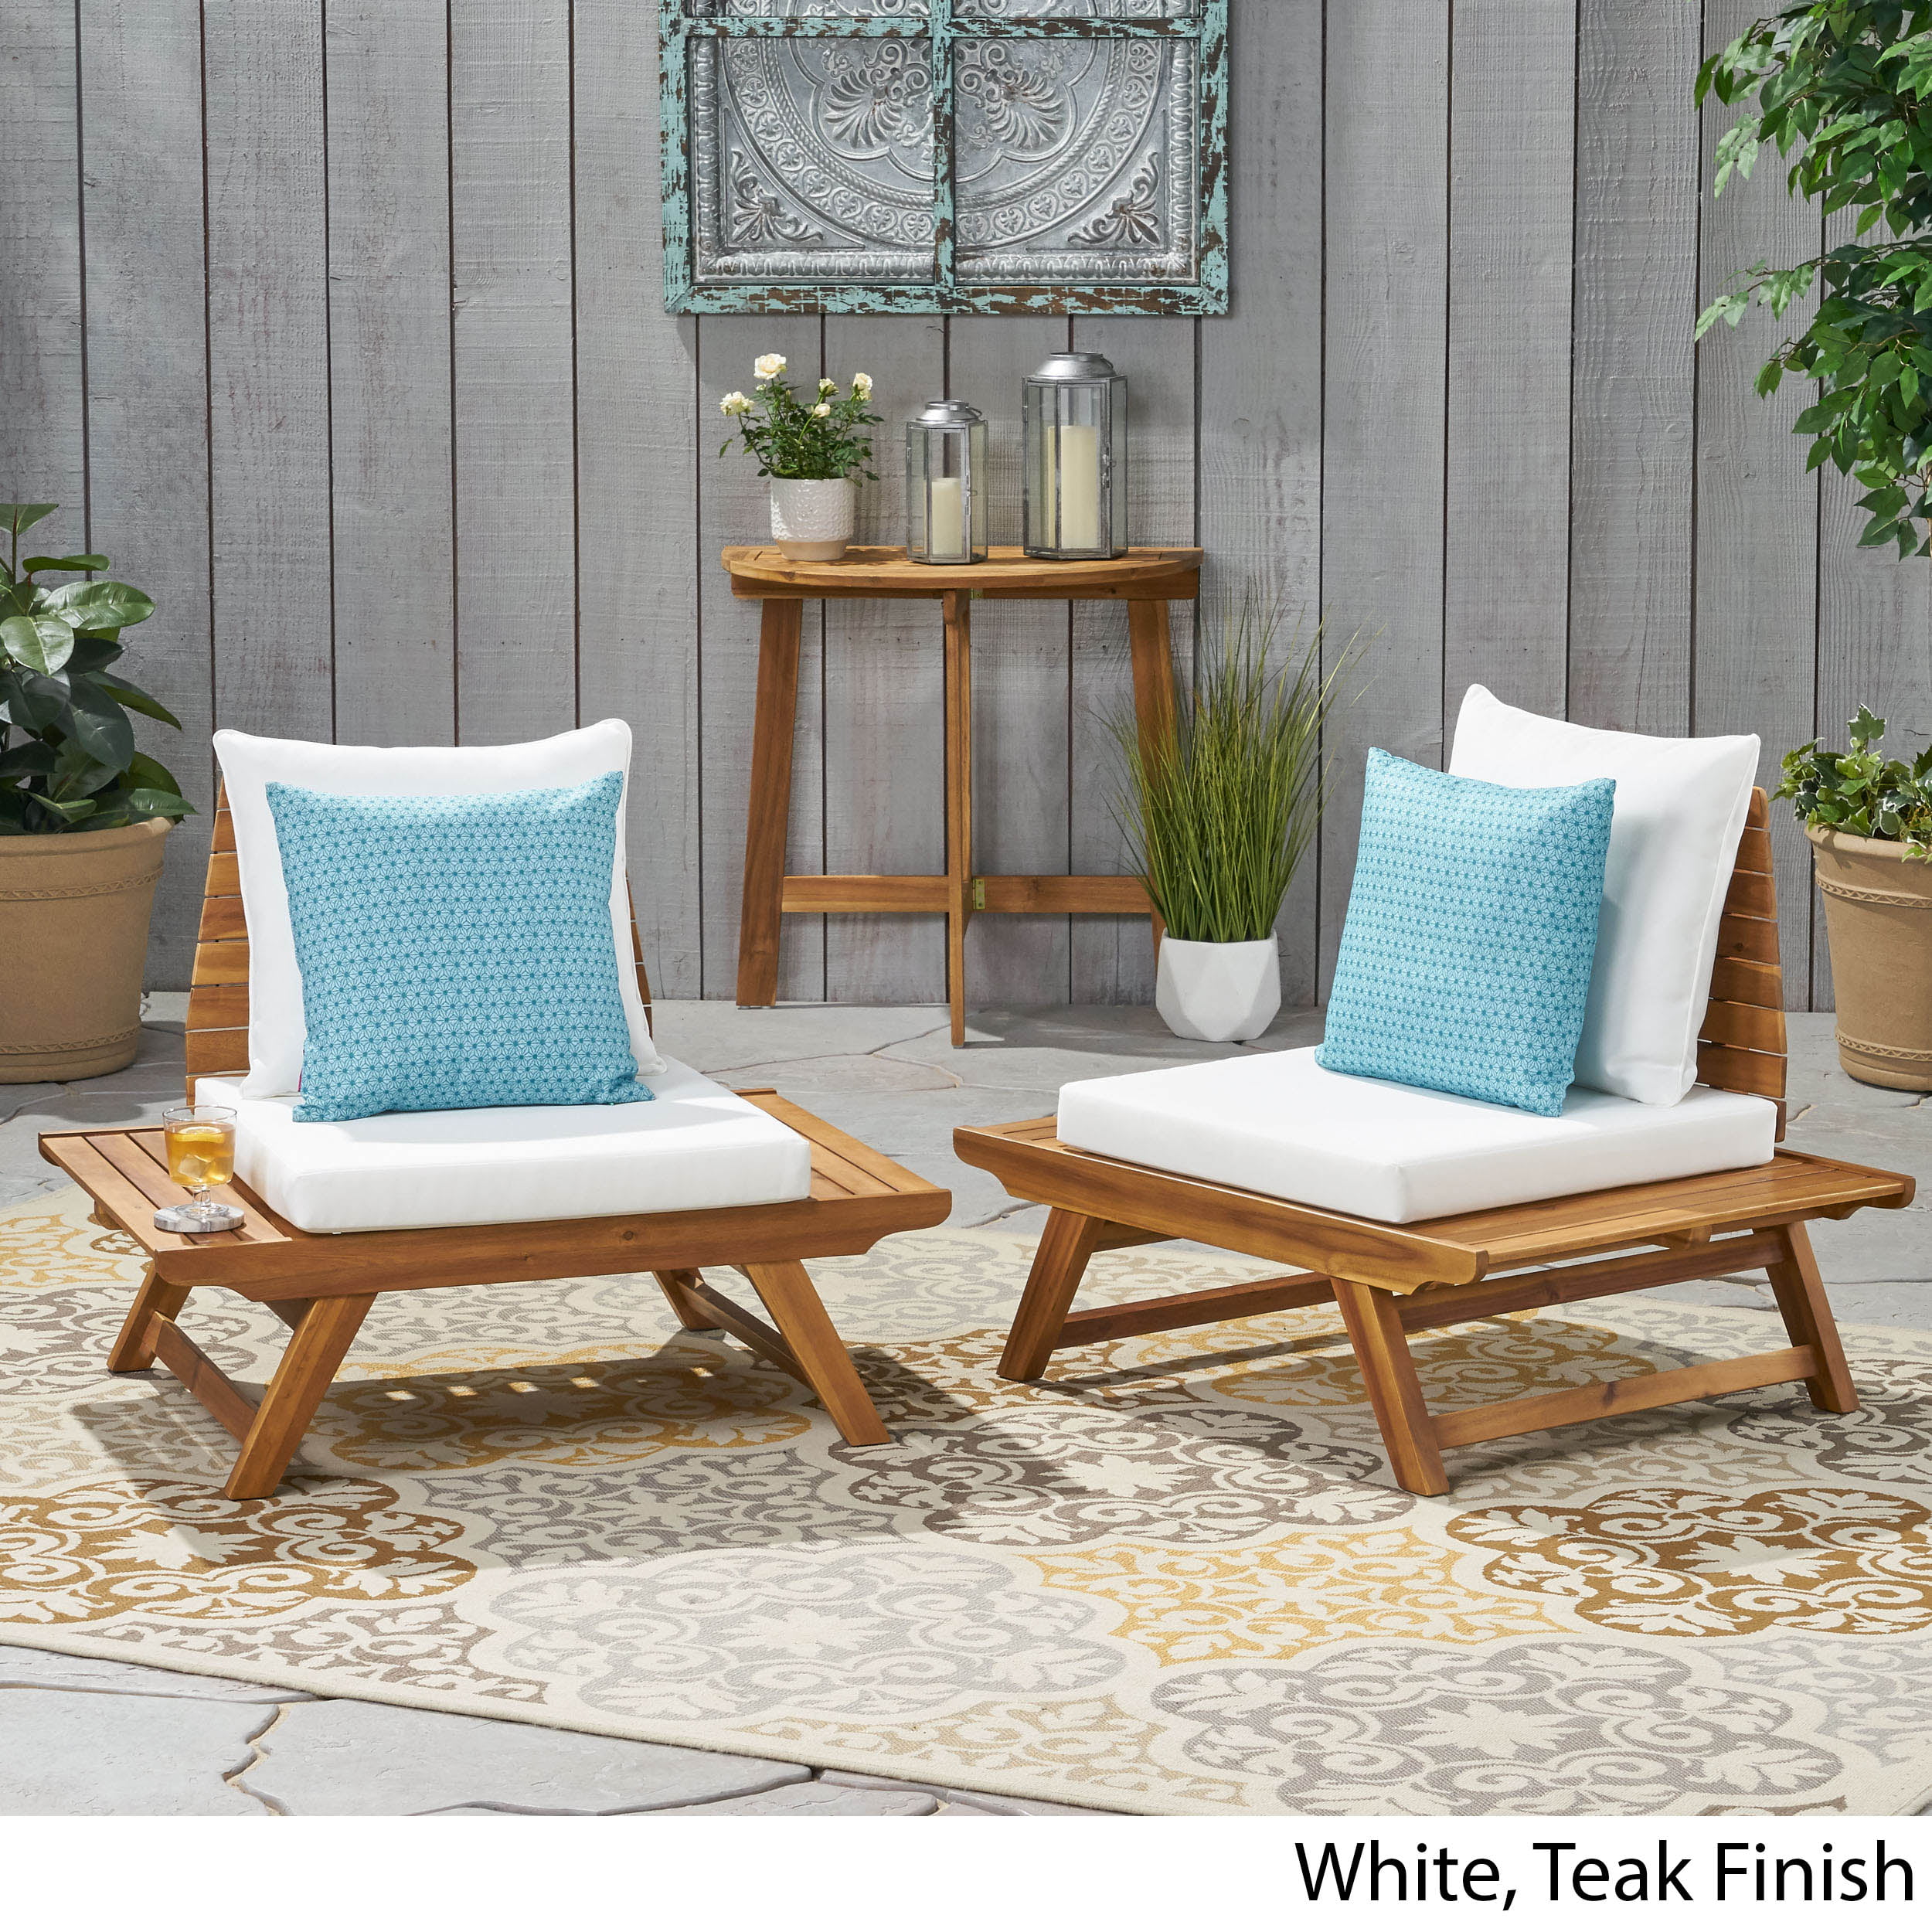 Kaiya Outdoor Wooden Club Chairs With, Outdoor Wood Chairs With Cushions